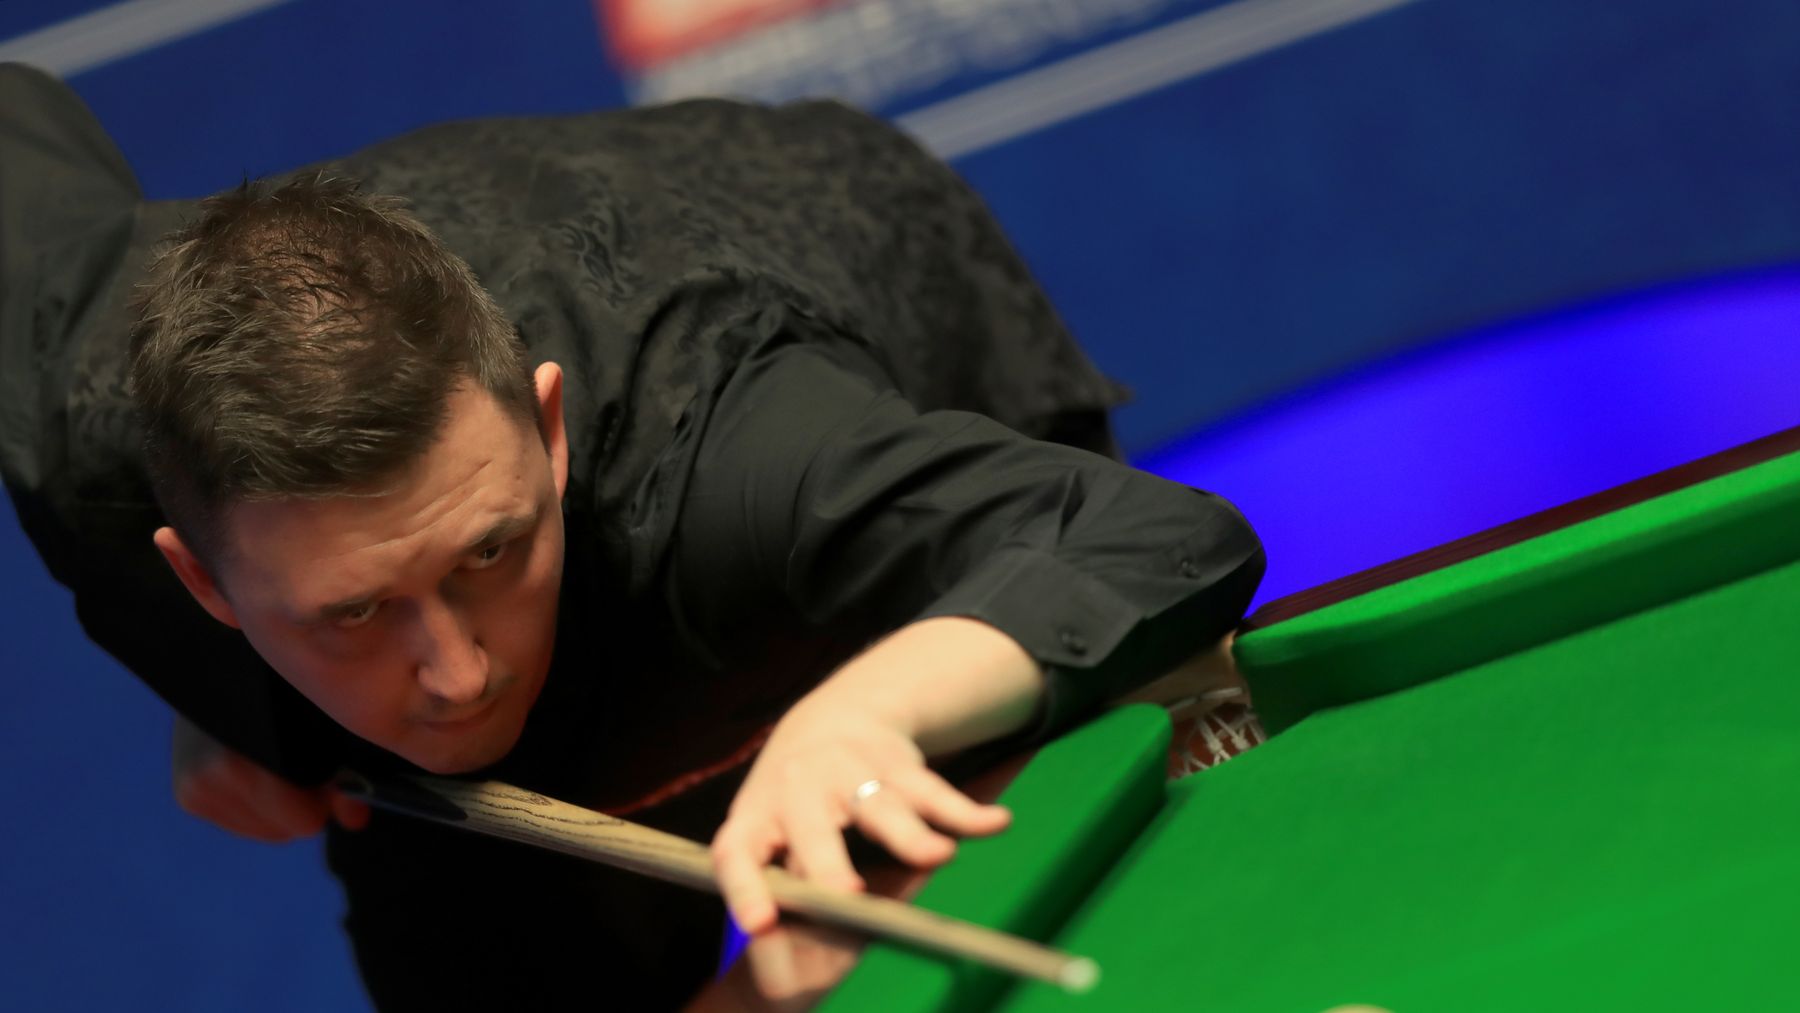 Snooker: List of Snooker Tour players 2021/22